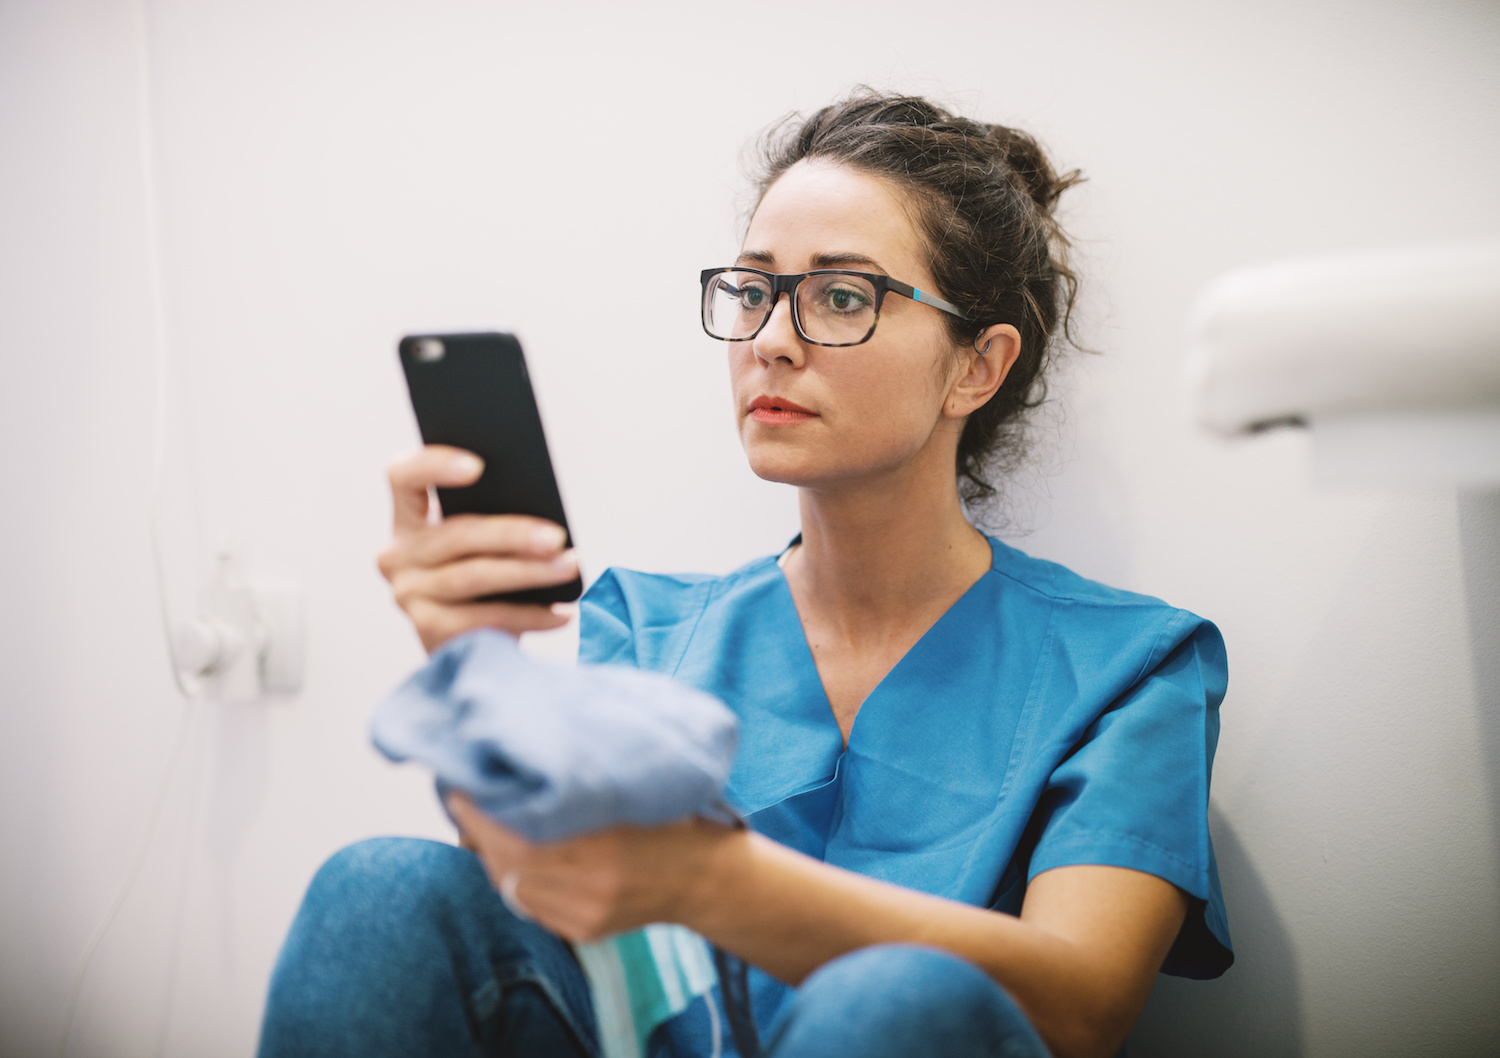 8 Social Media Tips for Cosmetic Surgeons